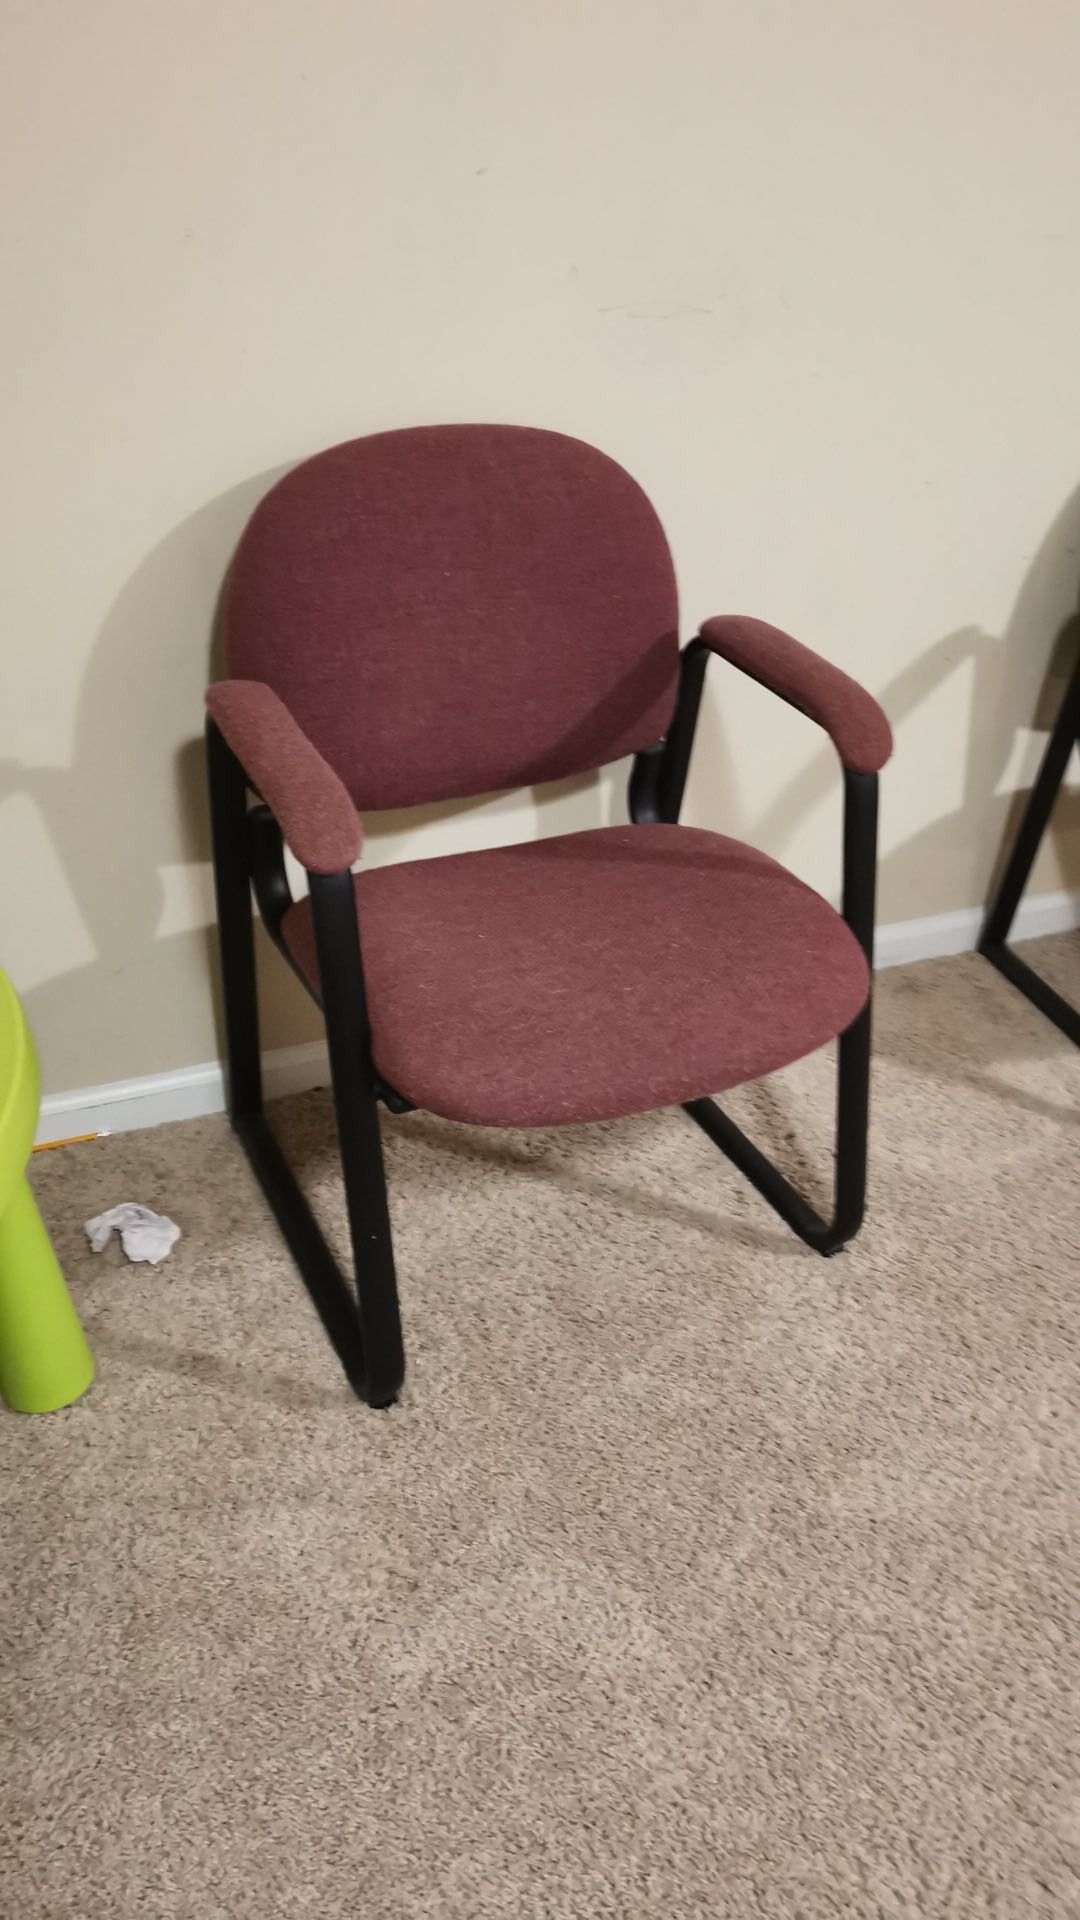 2 Red Office chair